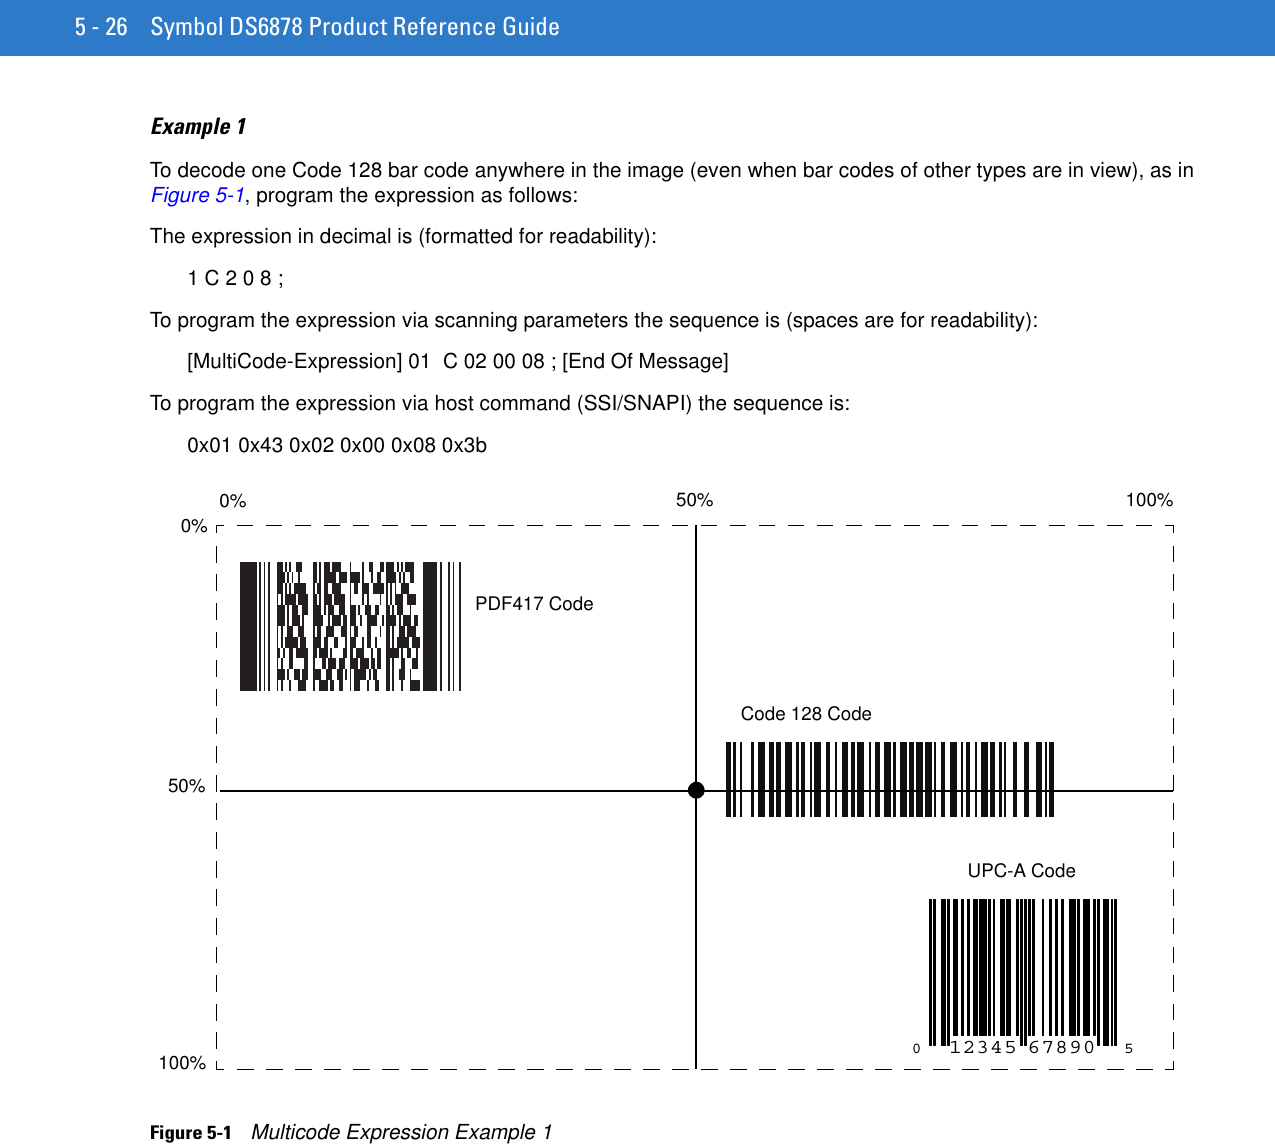 5 - 26 Symbol DS6878 Product Reference GuideExample 1To decode one Code 128 bar code anywhere in the image (even when bar codes of other types are in view), as in Figure 5-1, program the expression as follows:The expression in decimal is (formatted for readability): 1 C 2 0 8 ;To program the expression via scanning parameters the sequence is (spaces are for readability): [MultiCode-Expression] 01  C 02 00 08 ; [End Of Message]To program the expression via host command (SSI/SNAPI) the sequence is: 0x01 0x43 0x02 0x00 0x08 0x3b Figure 5-1    Multicode Expression Example 101234567890550%0%100%0% 50% 100%PDF417 CodeCode 128 CodeUPC-A Code